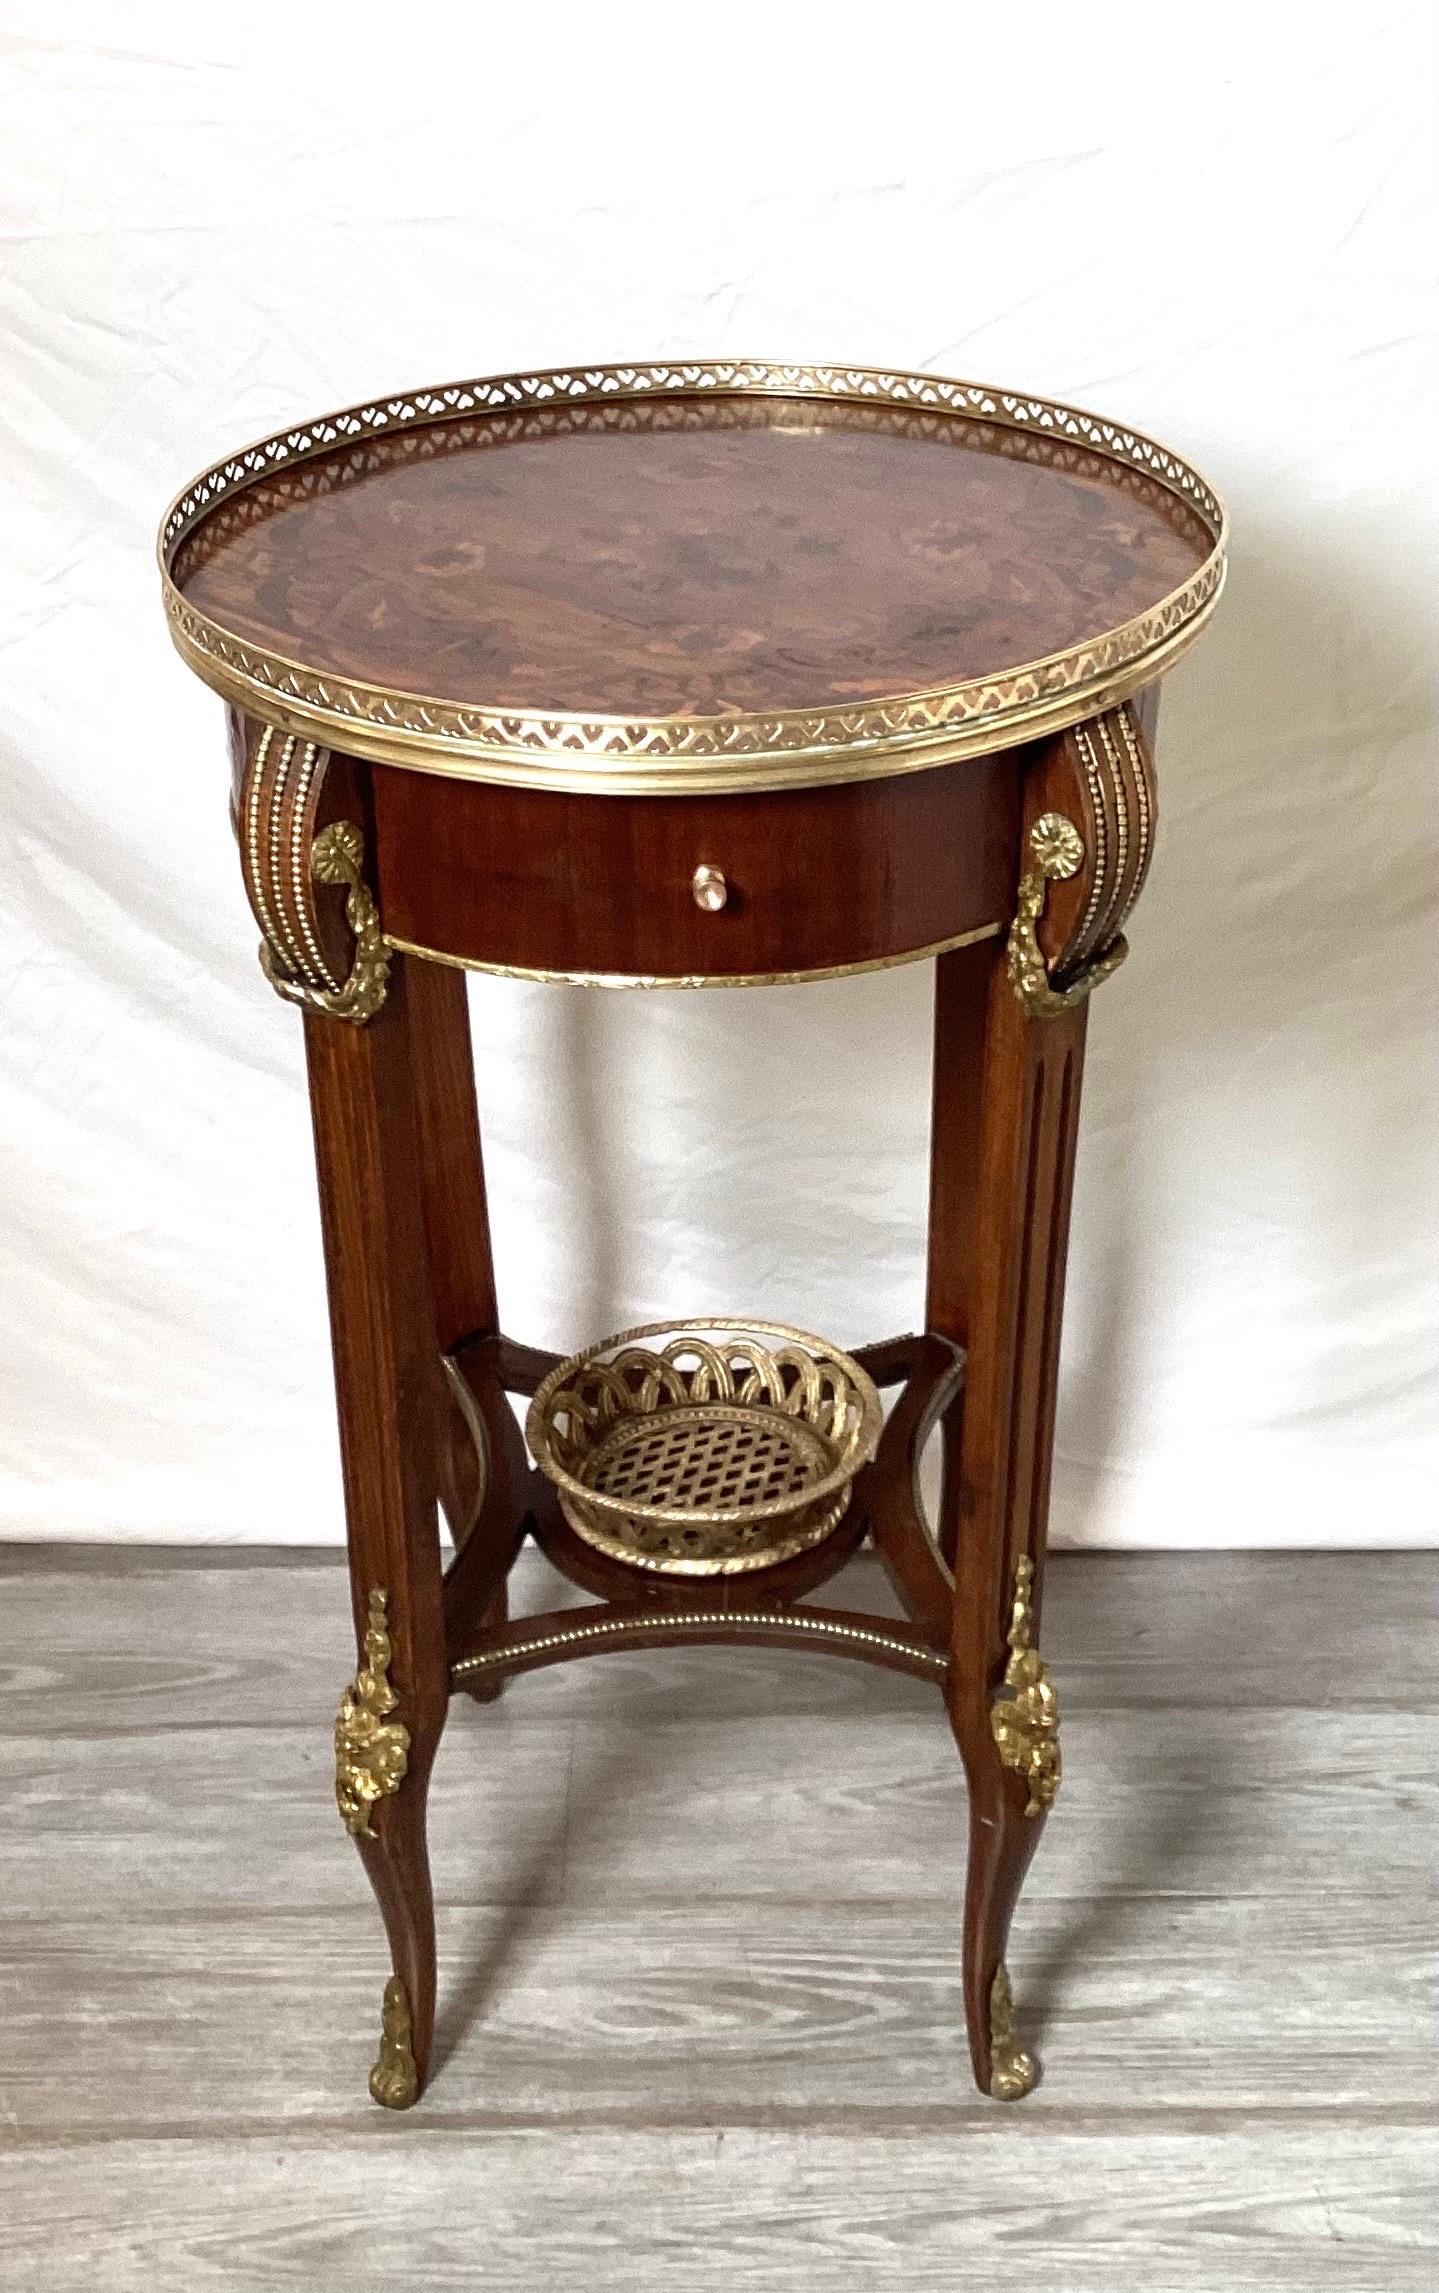 Louis XV Mahogany and Tulip Wood Inlaid Gilt Mounted Gallery Table